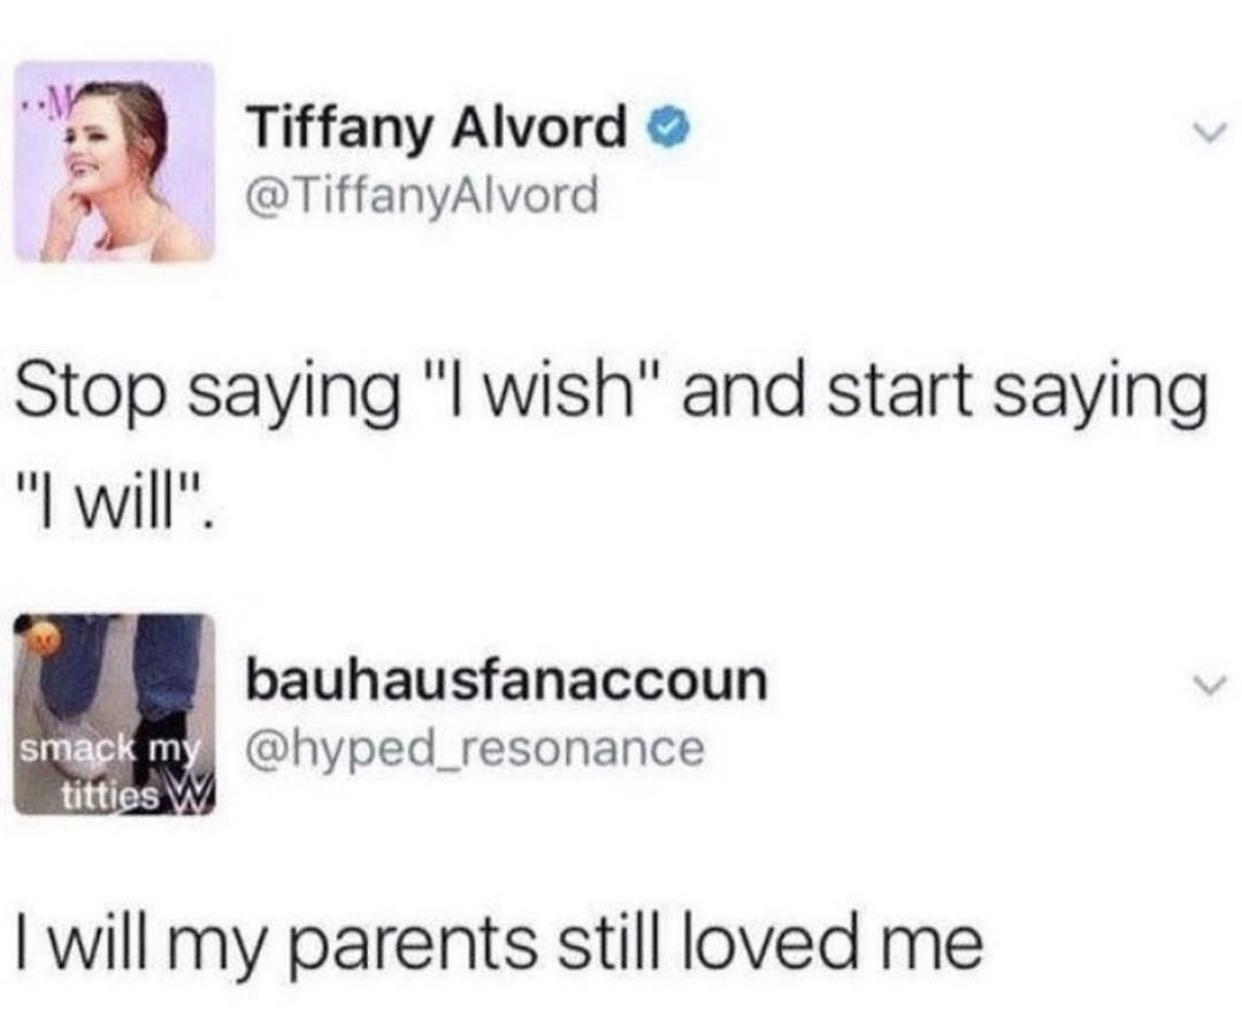 hilarious twitter memes that will make you pee your pants - Tiffany Alvord Stop saying "I wish" and start saying "I will". bauhausfanaccoun smack my titties W I will my parents still loved me